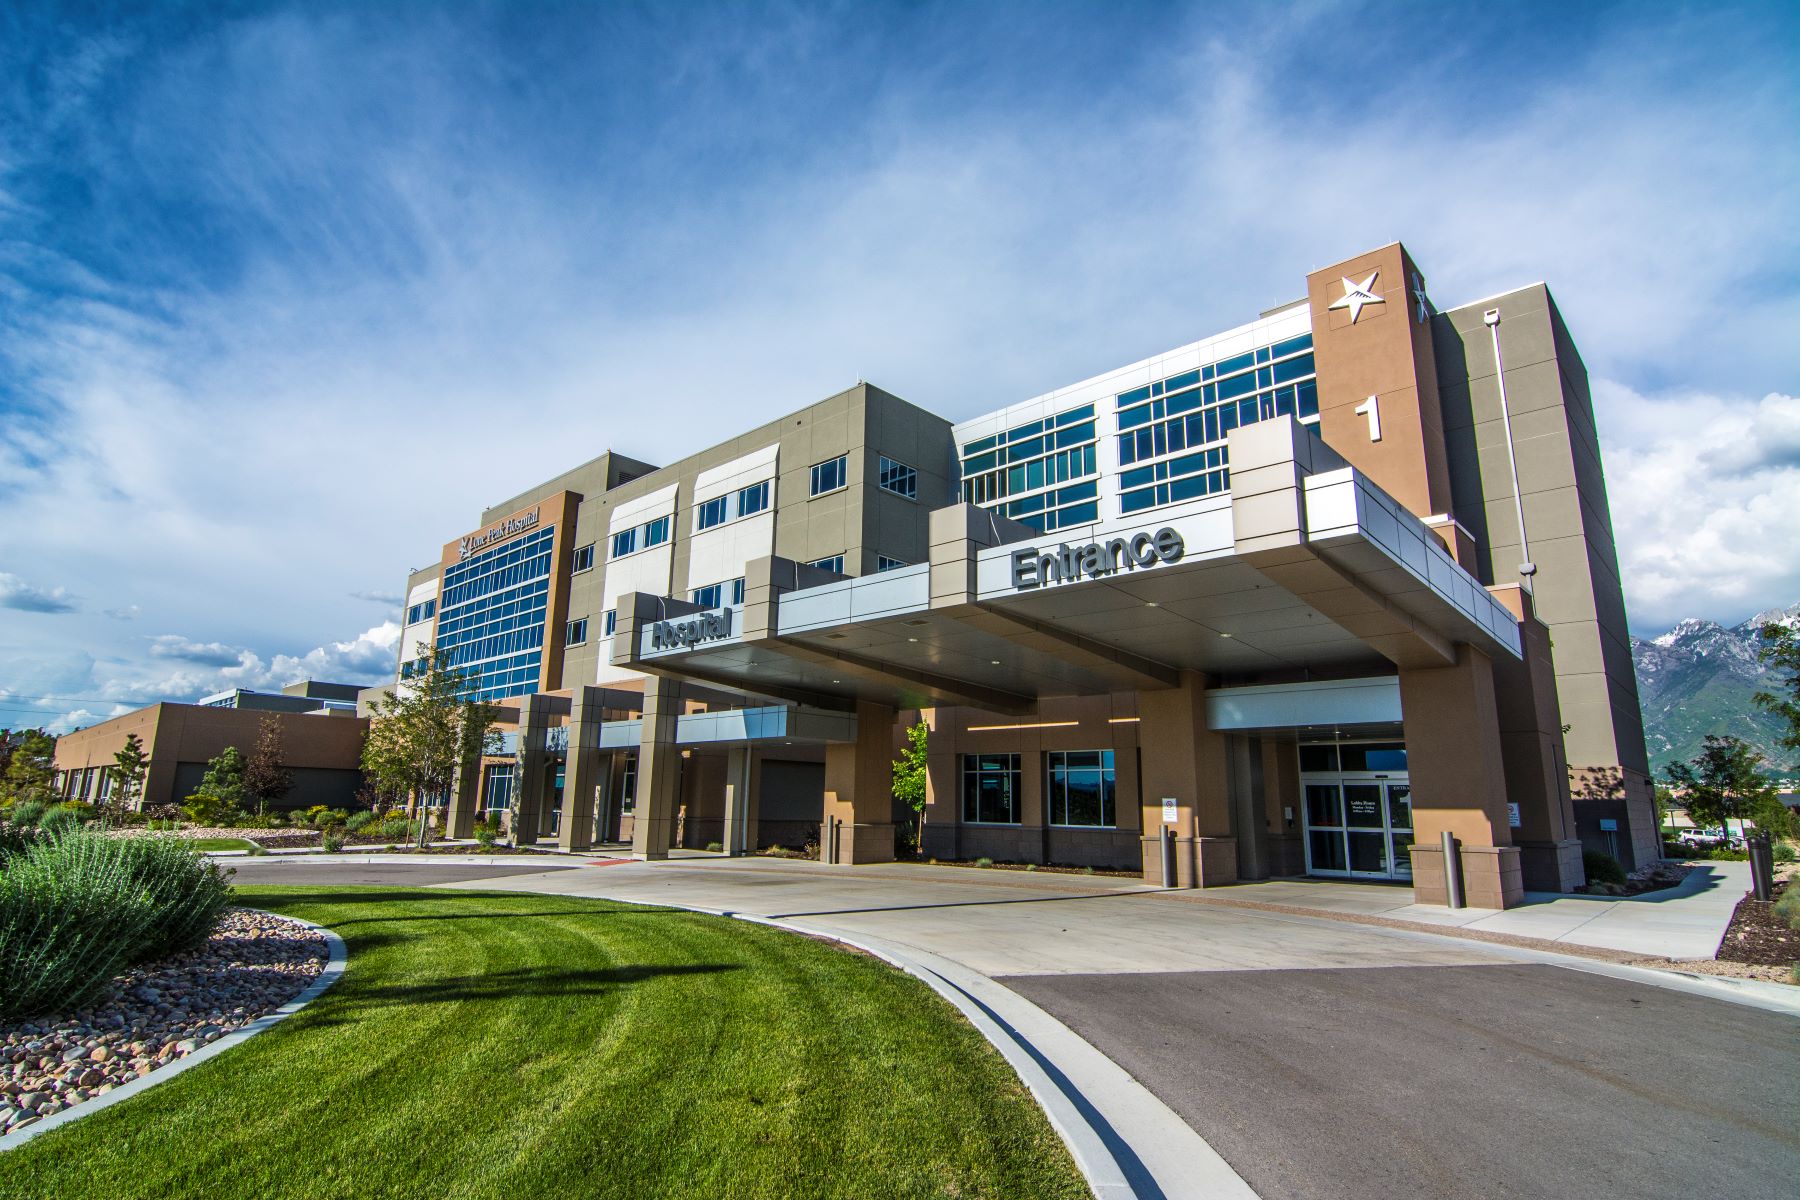 Solis Mammography and Lone Peak Hospital